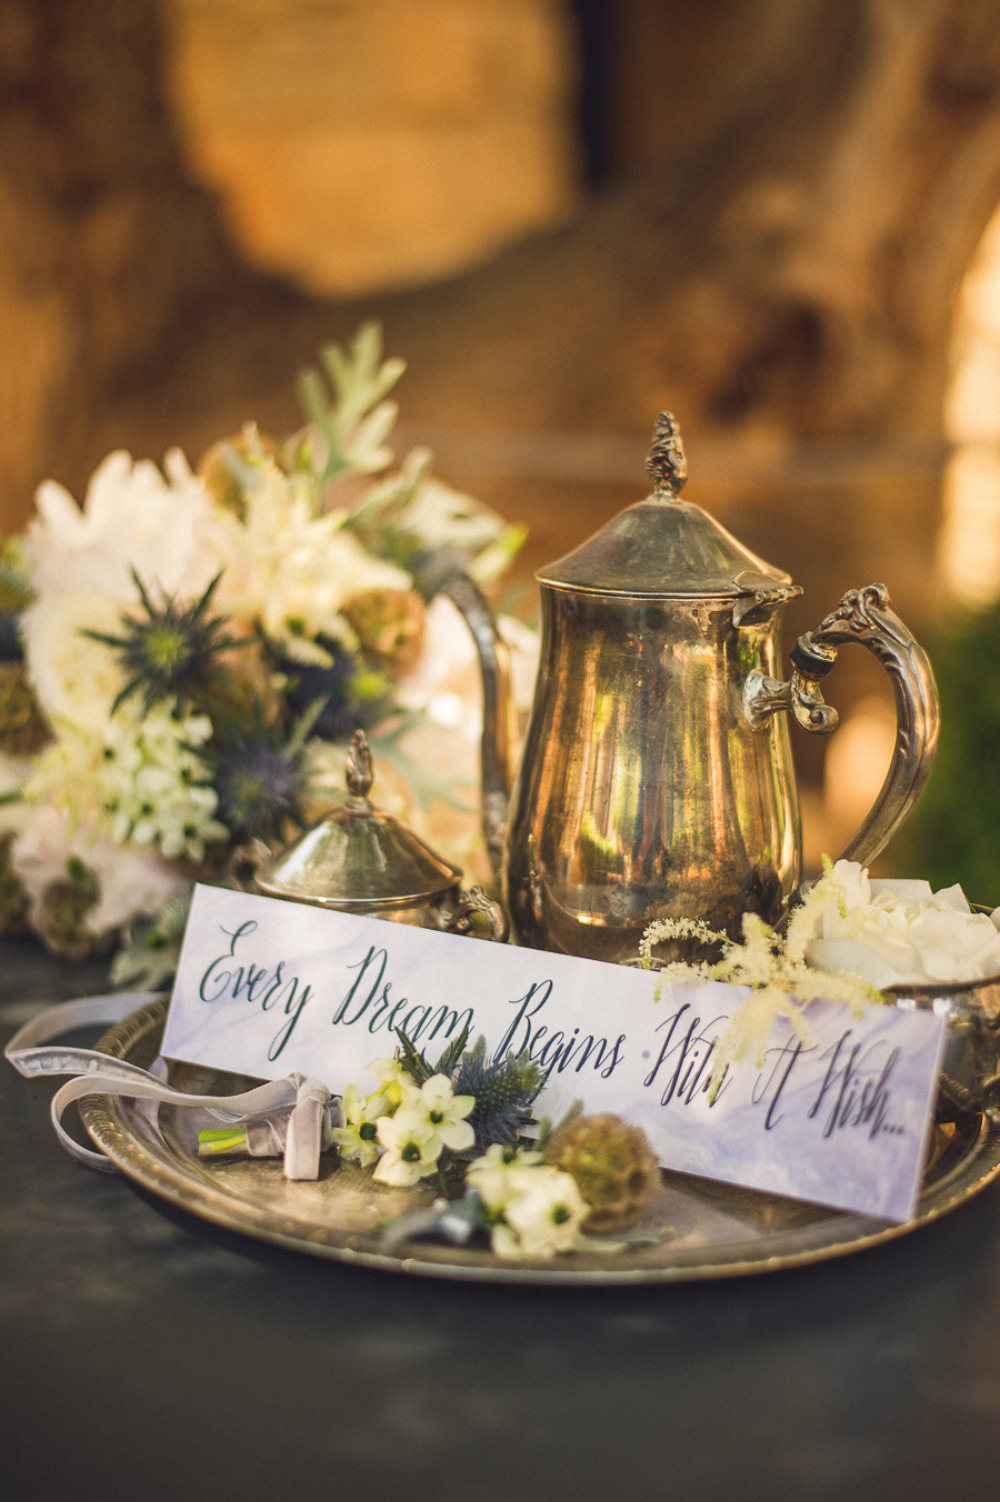 every dream begins with a wish wedding sign